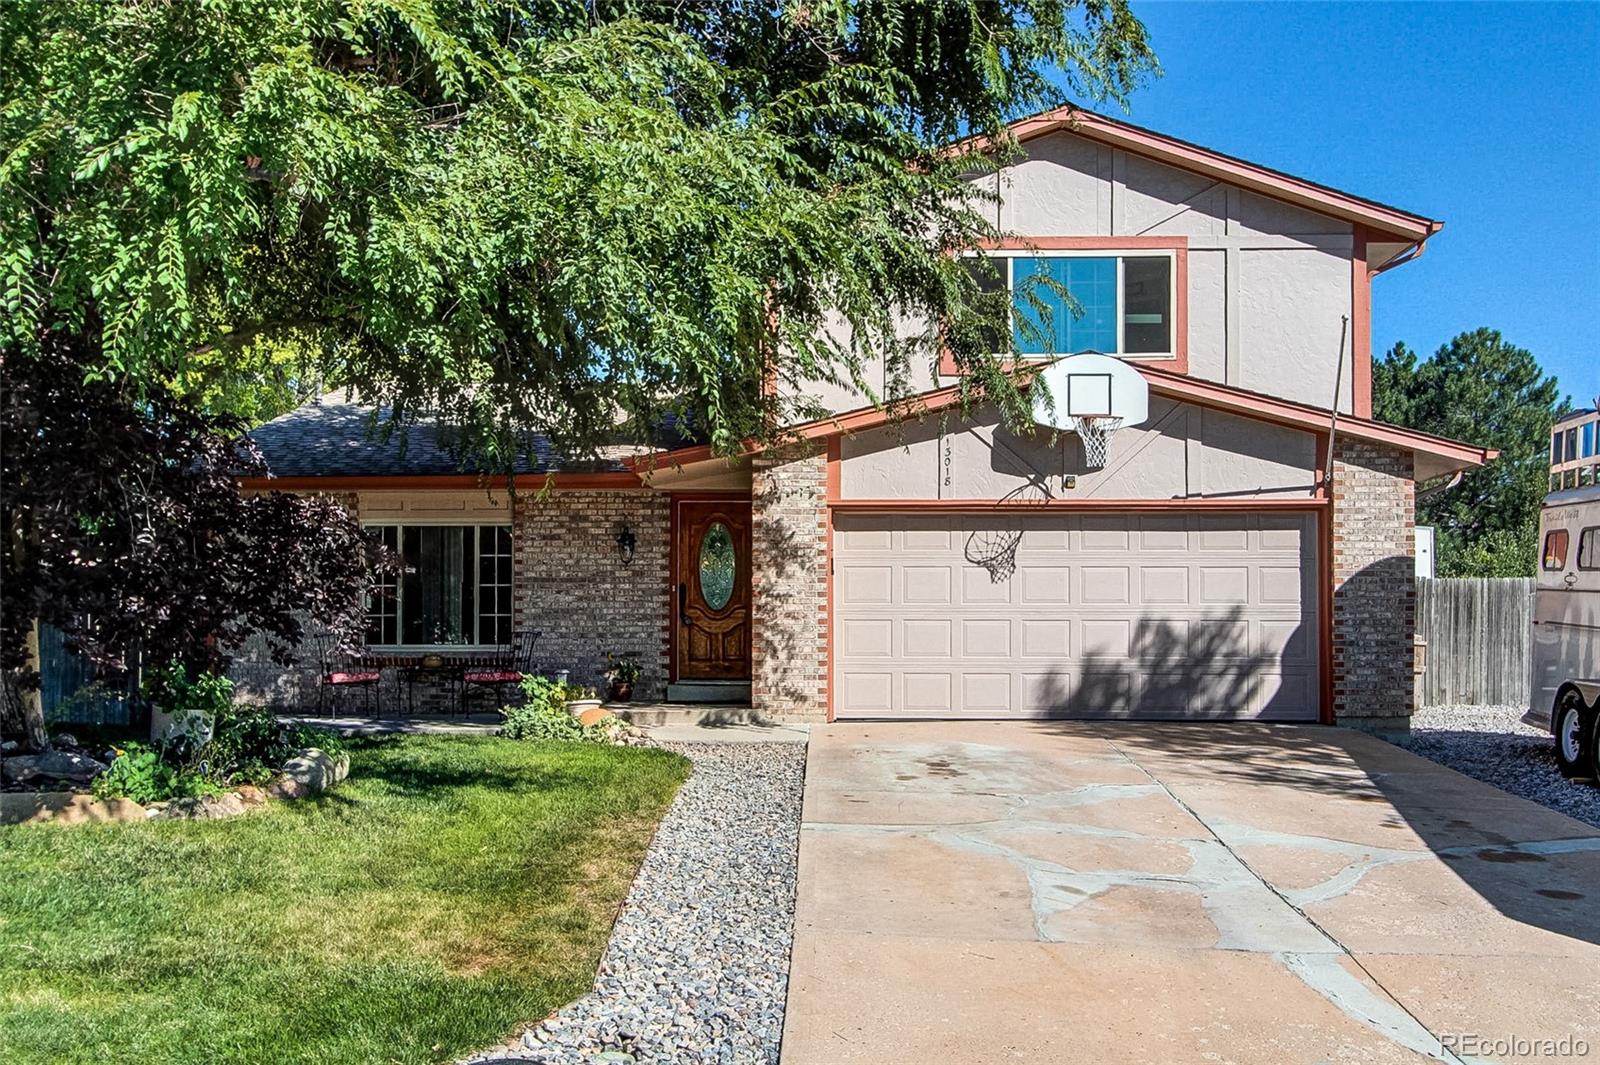 13018  fillmore circle, thornton sold home. Closed on 2024-05-07 for $630,000.